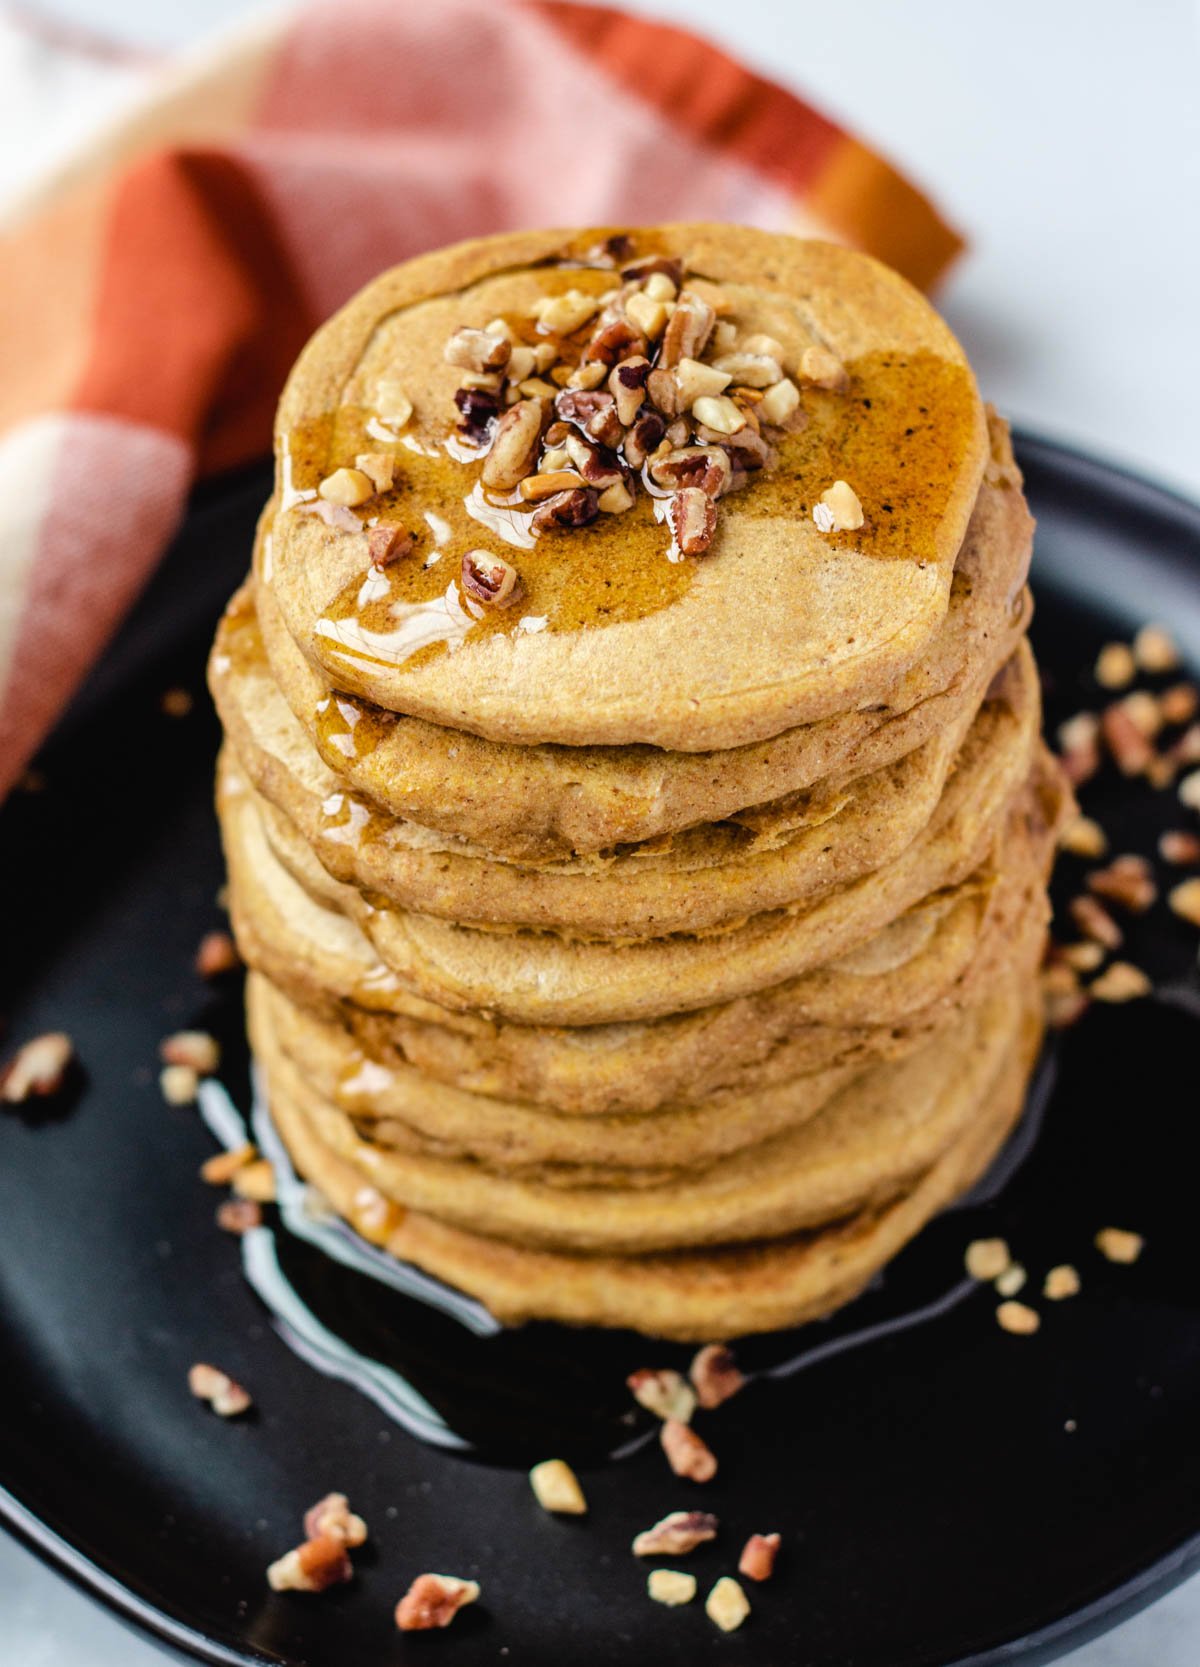 Stack of vegan pumpkin pancakes topped with chopped nuts and maple syrup on black plate.